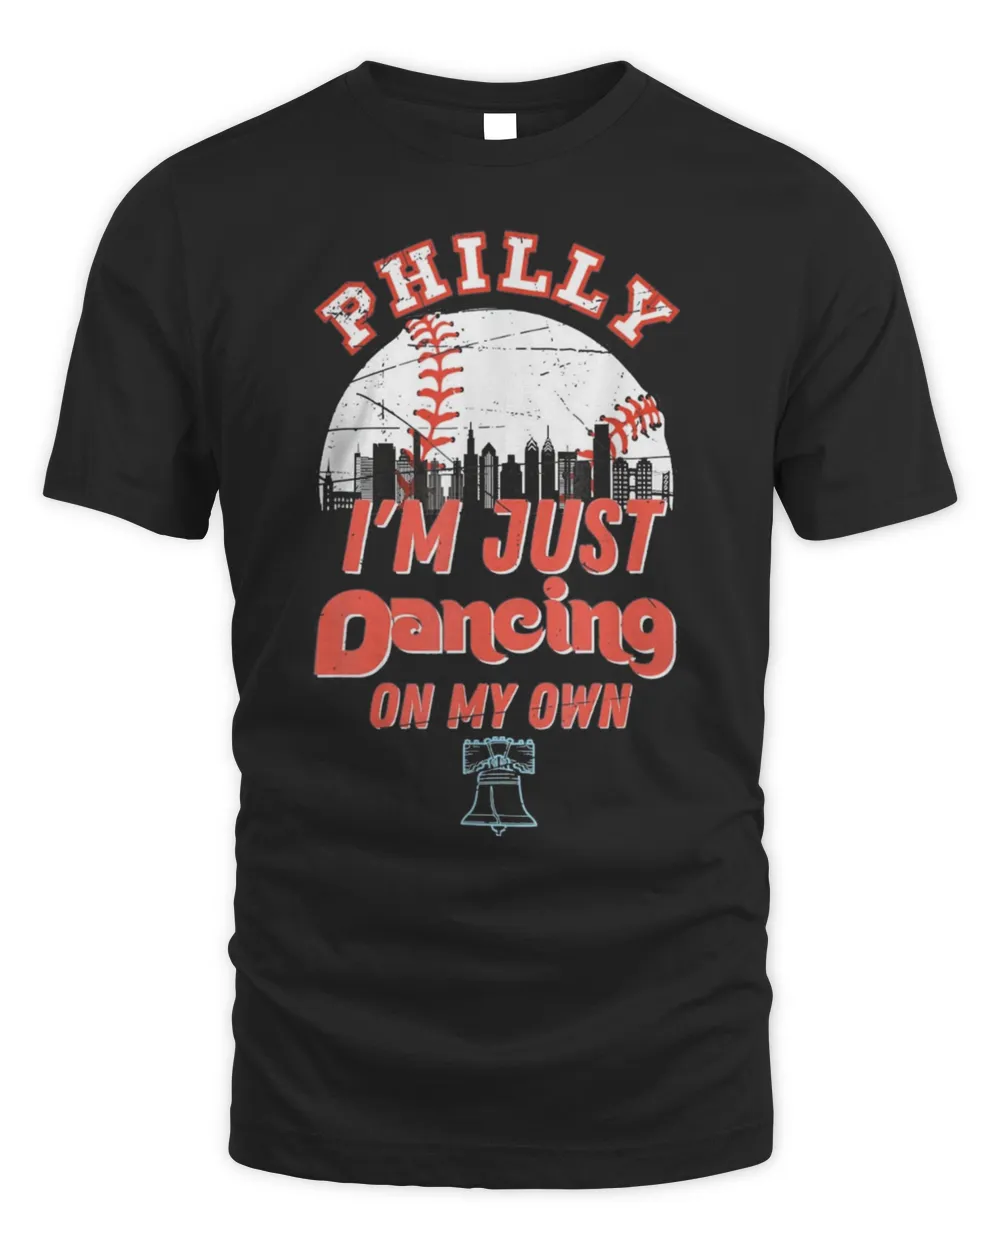 I’m just philly dancing on my own philadelphia Shirt